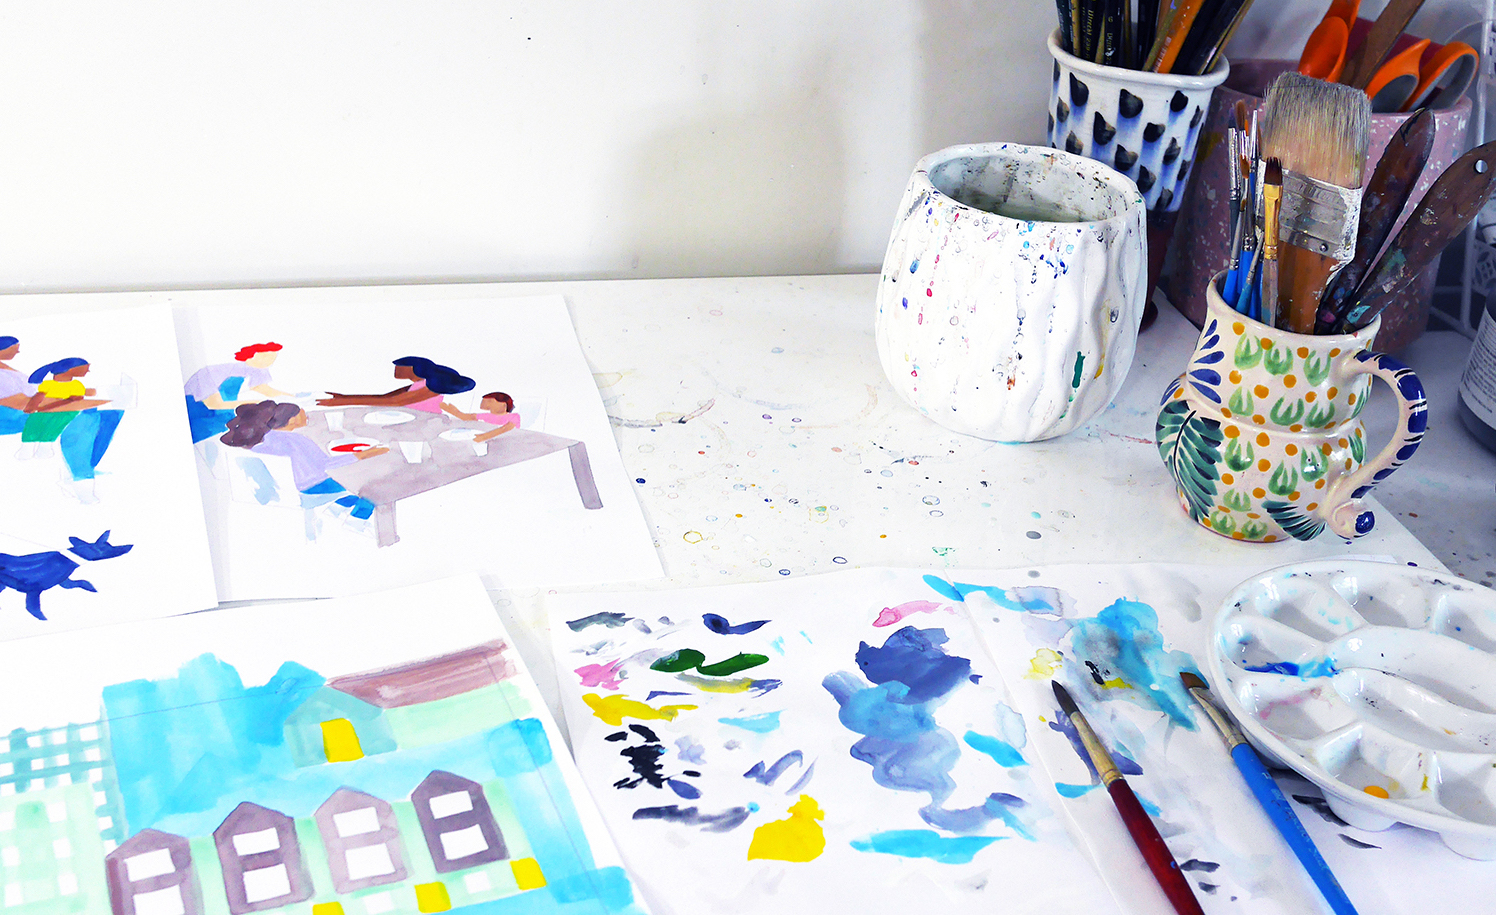 Artist Sirin Thada's desk with paintbrushes and illustrations